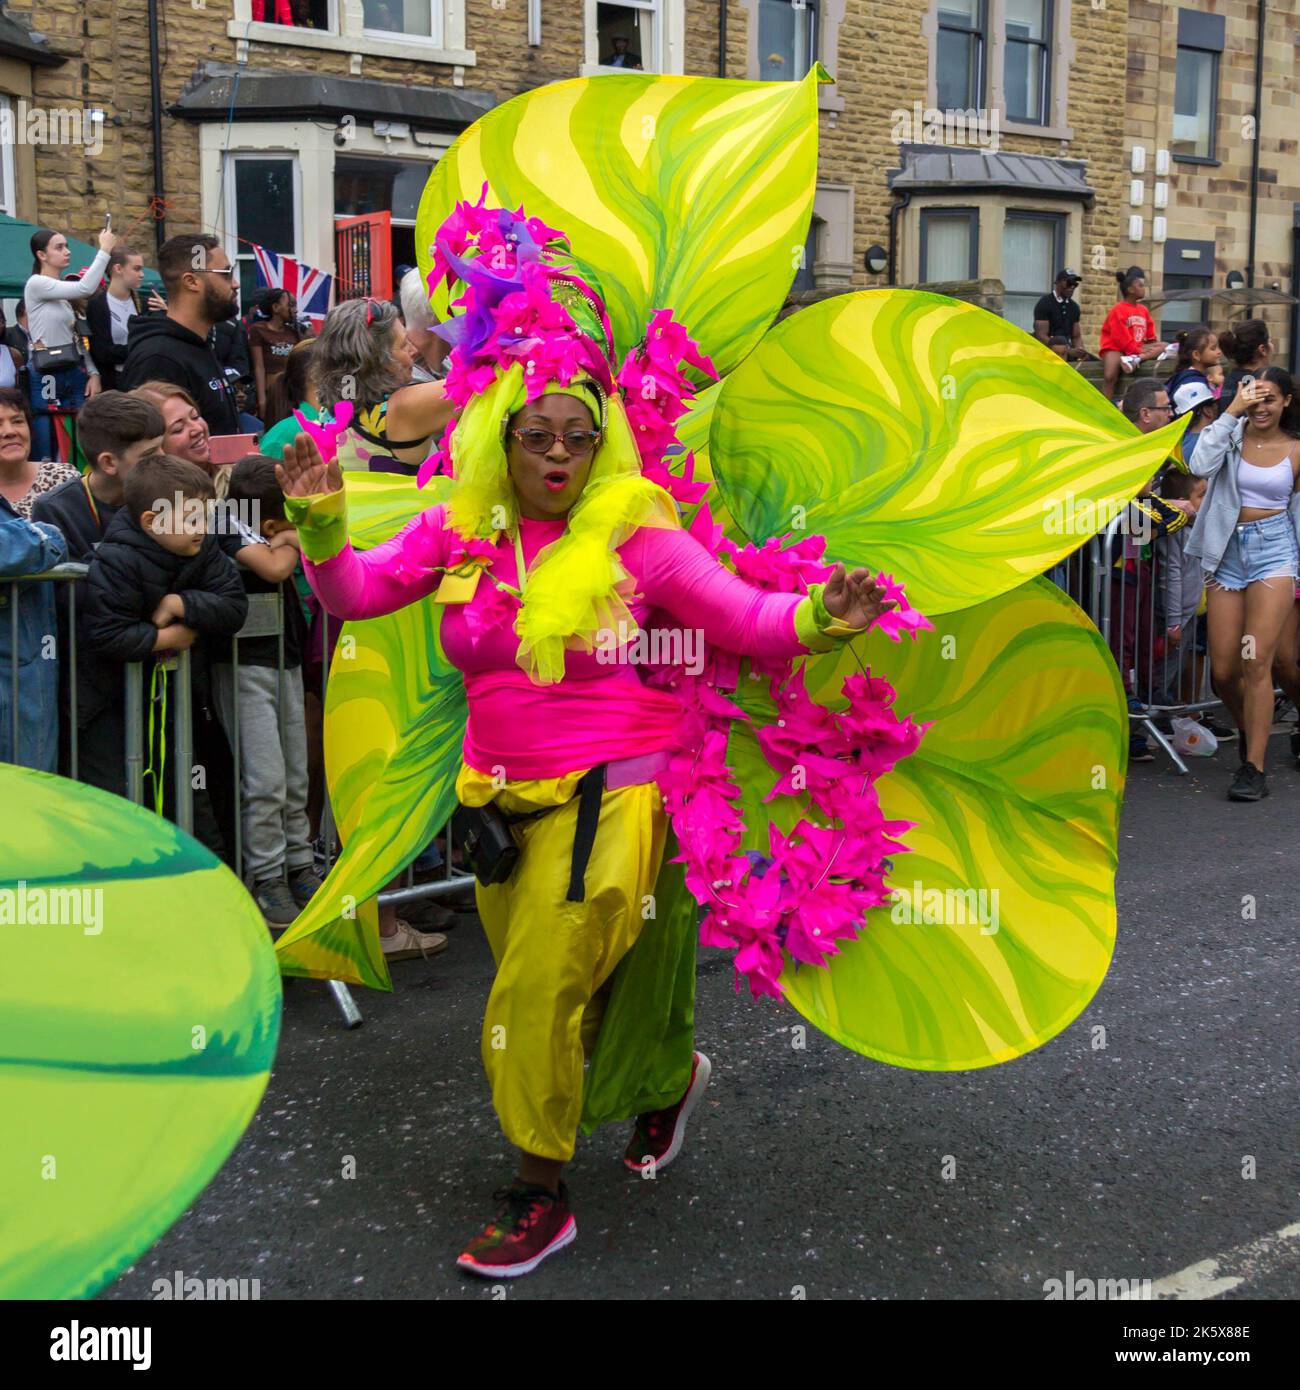 Donna in costume colorato fiore a Leeds West Indian Carnival Parade Foto Stock